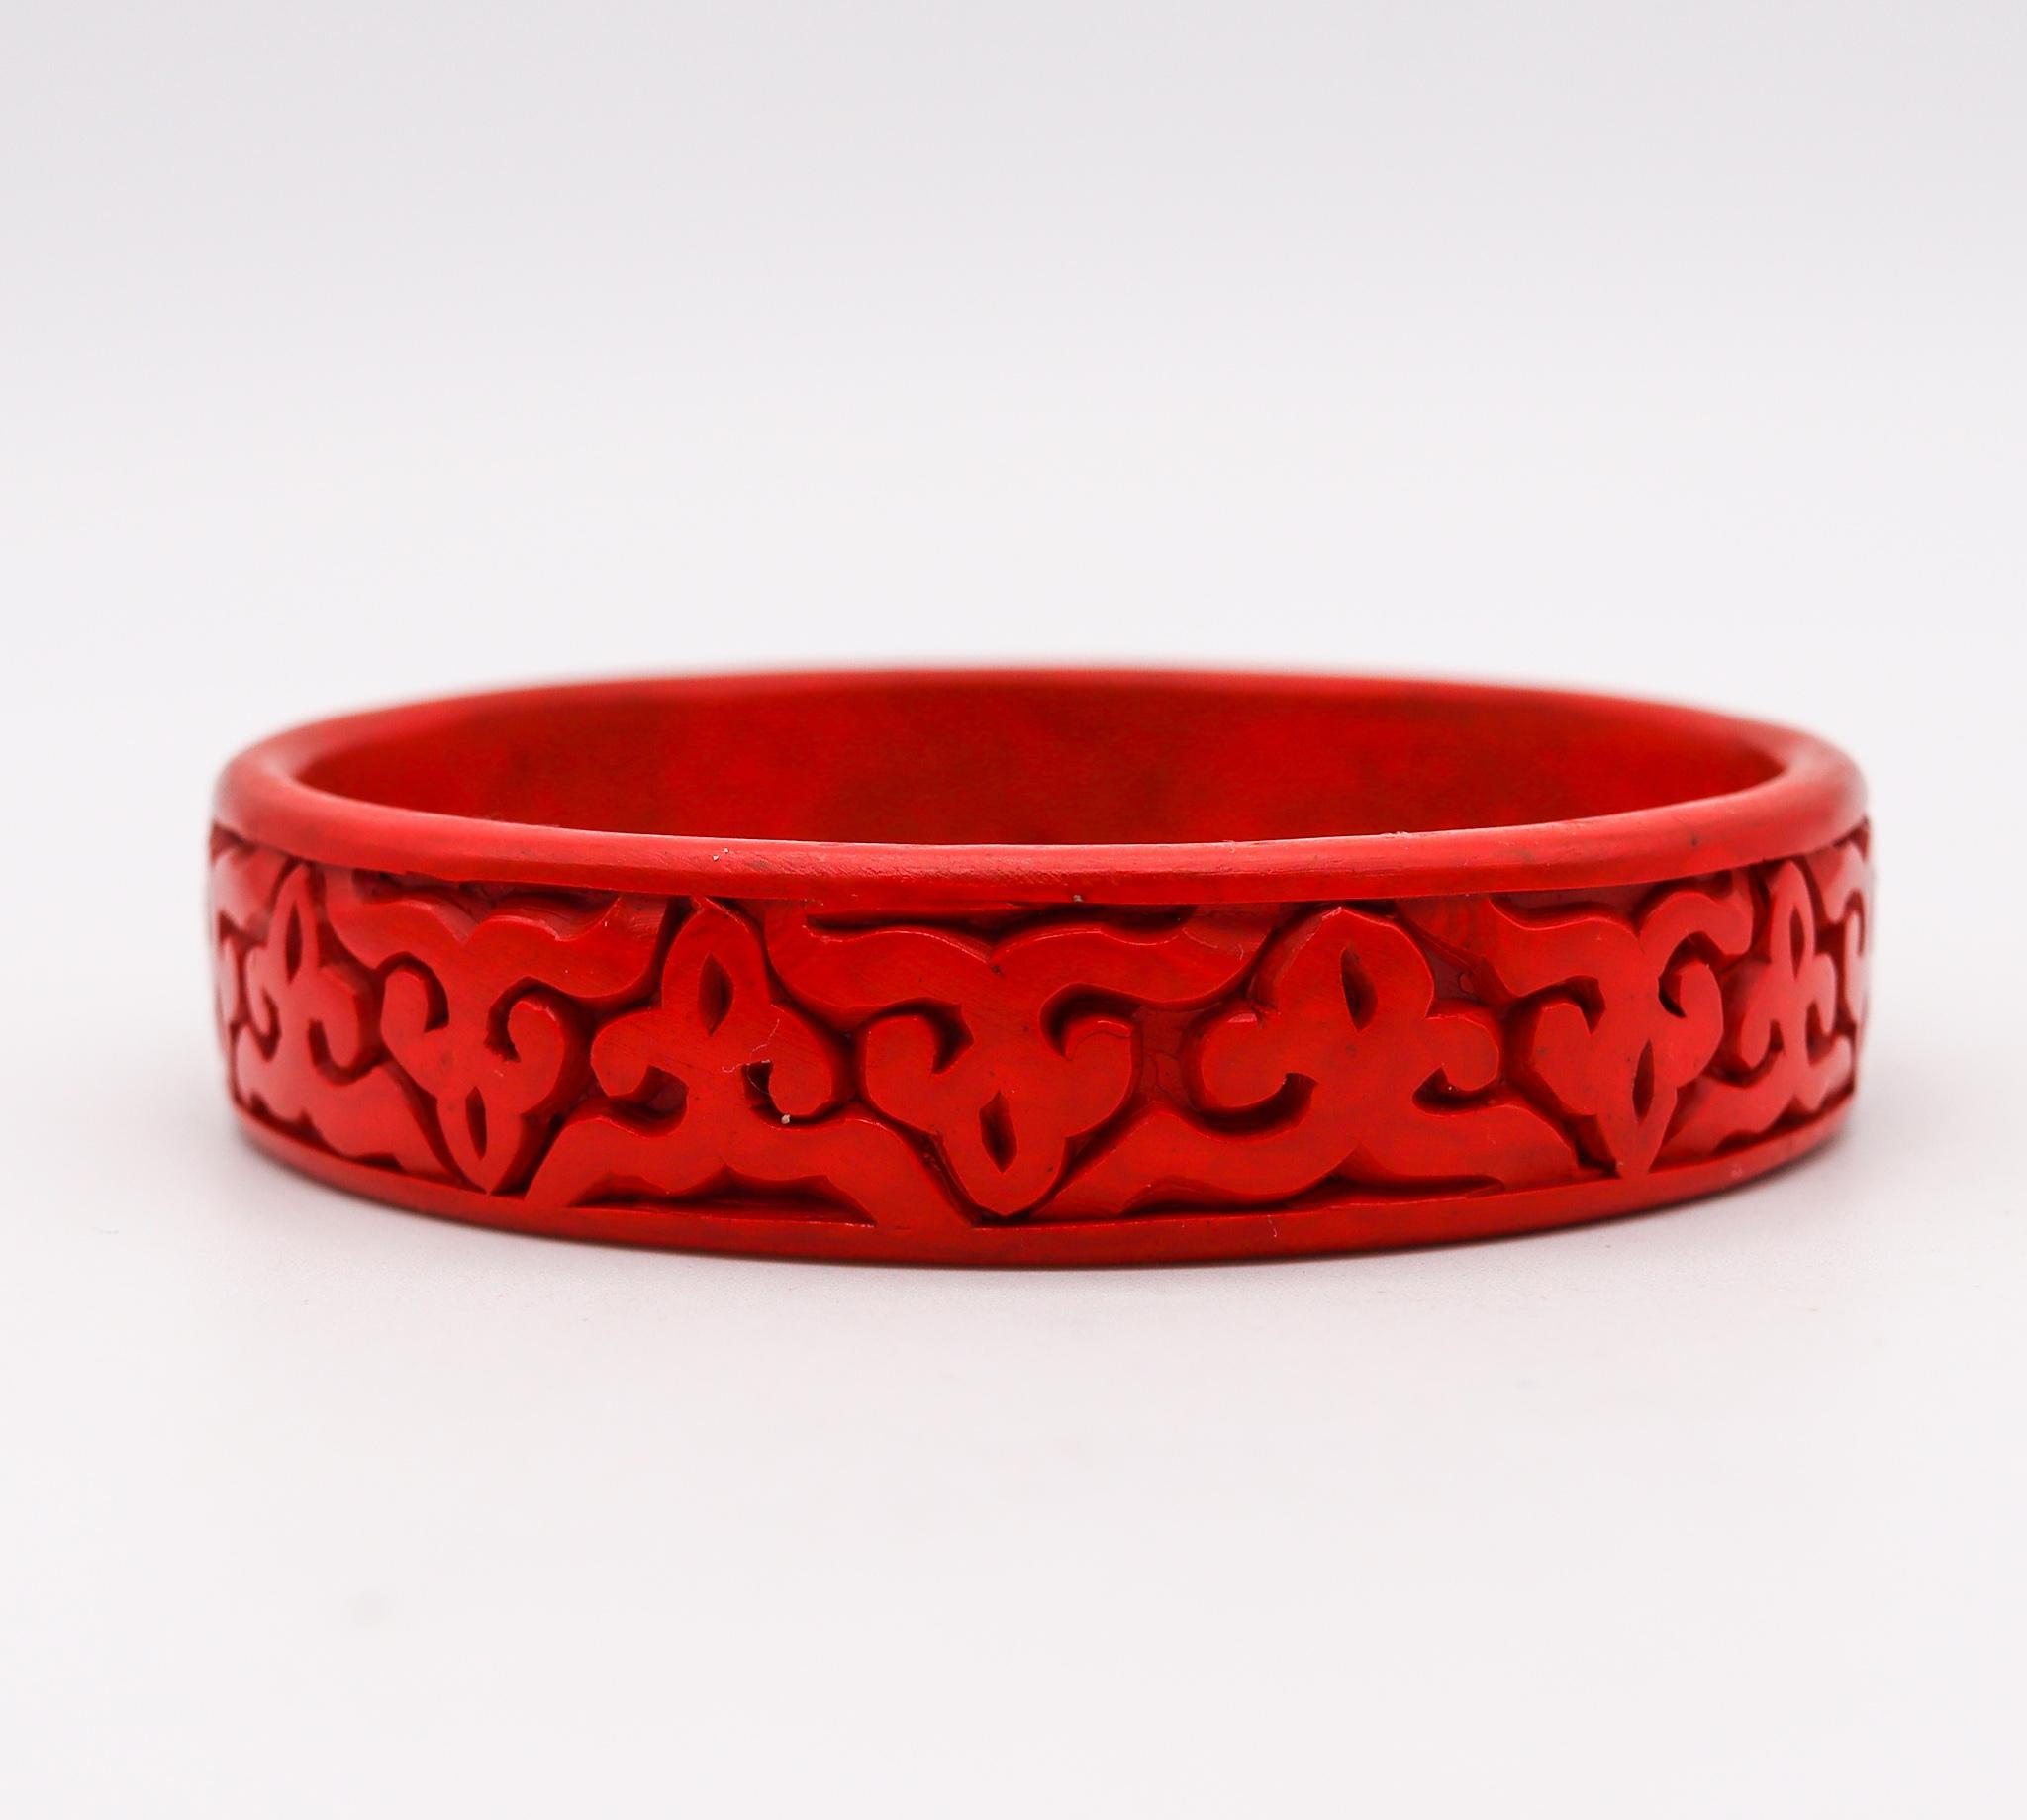 A red Cinnabar lacquer bangle bracelet.

Very nice antique Chinese export bangle bracelet, made in the late 19th century during the Victorian era (1838-1901), circa 1900. It is finely made in wood with red cinnabar lacquer and carved with geometric